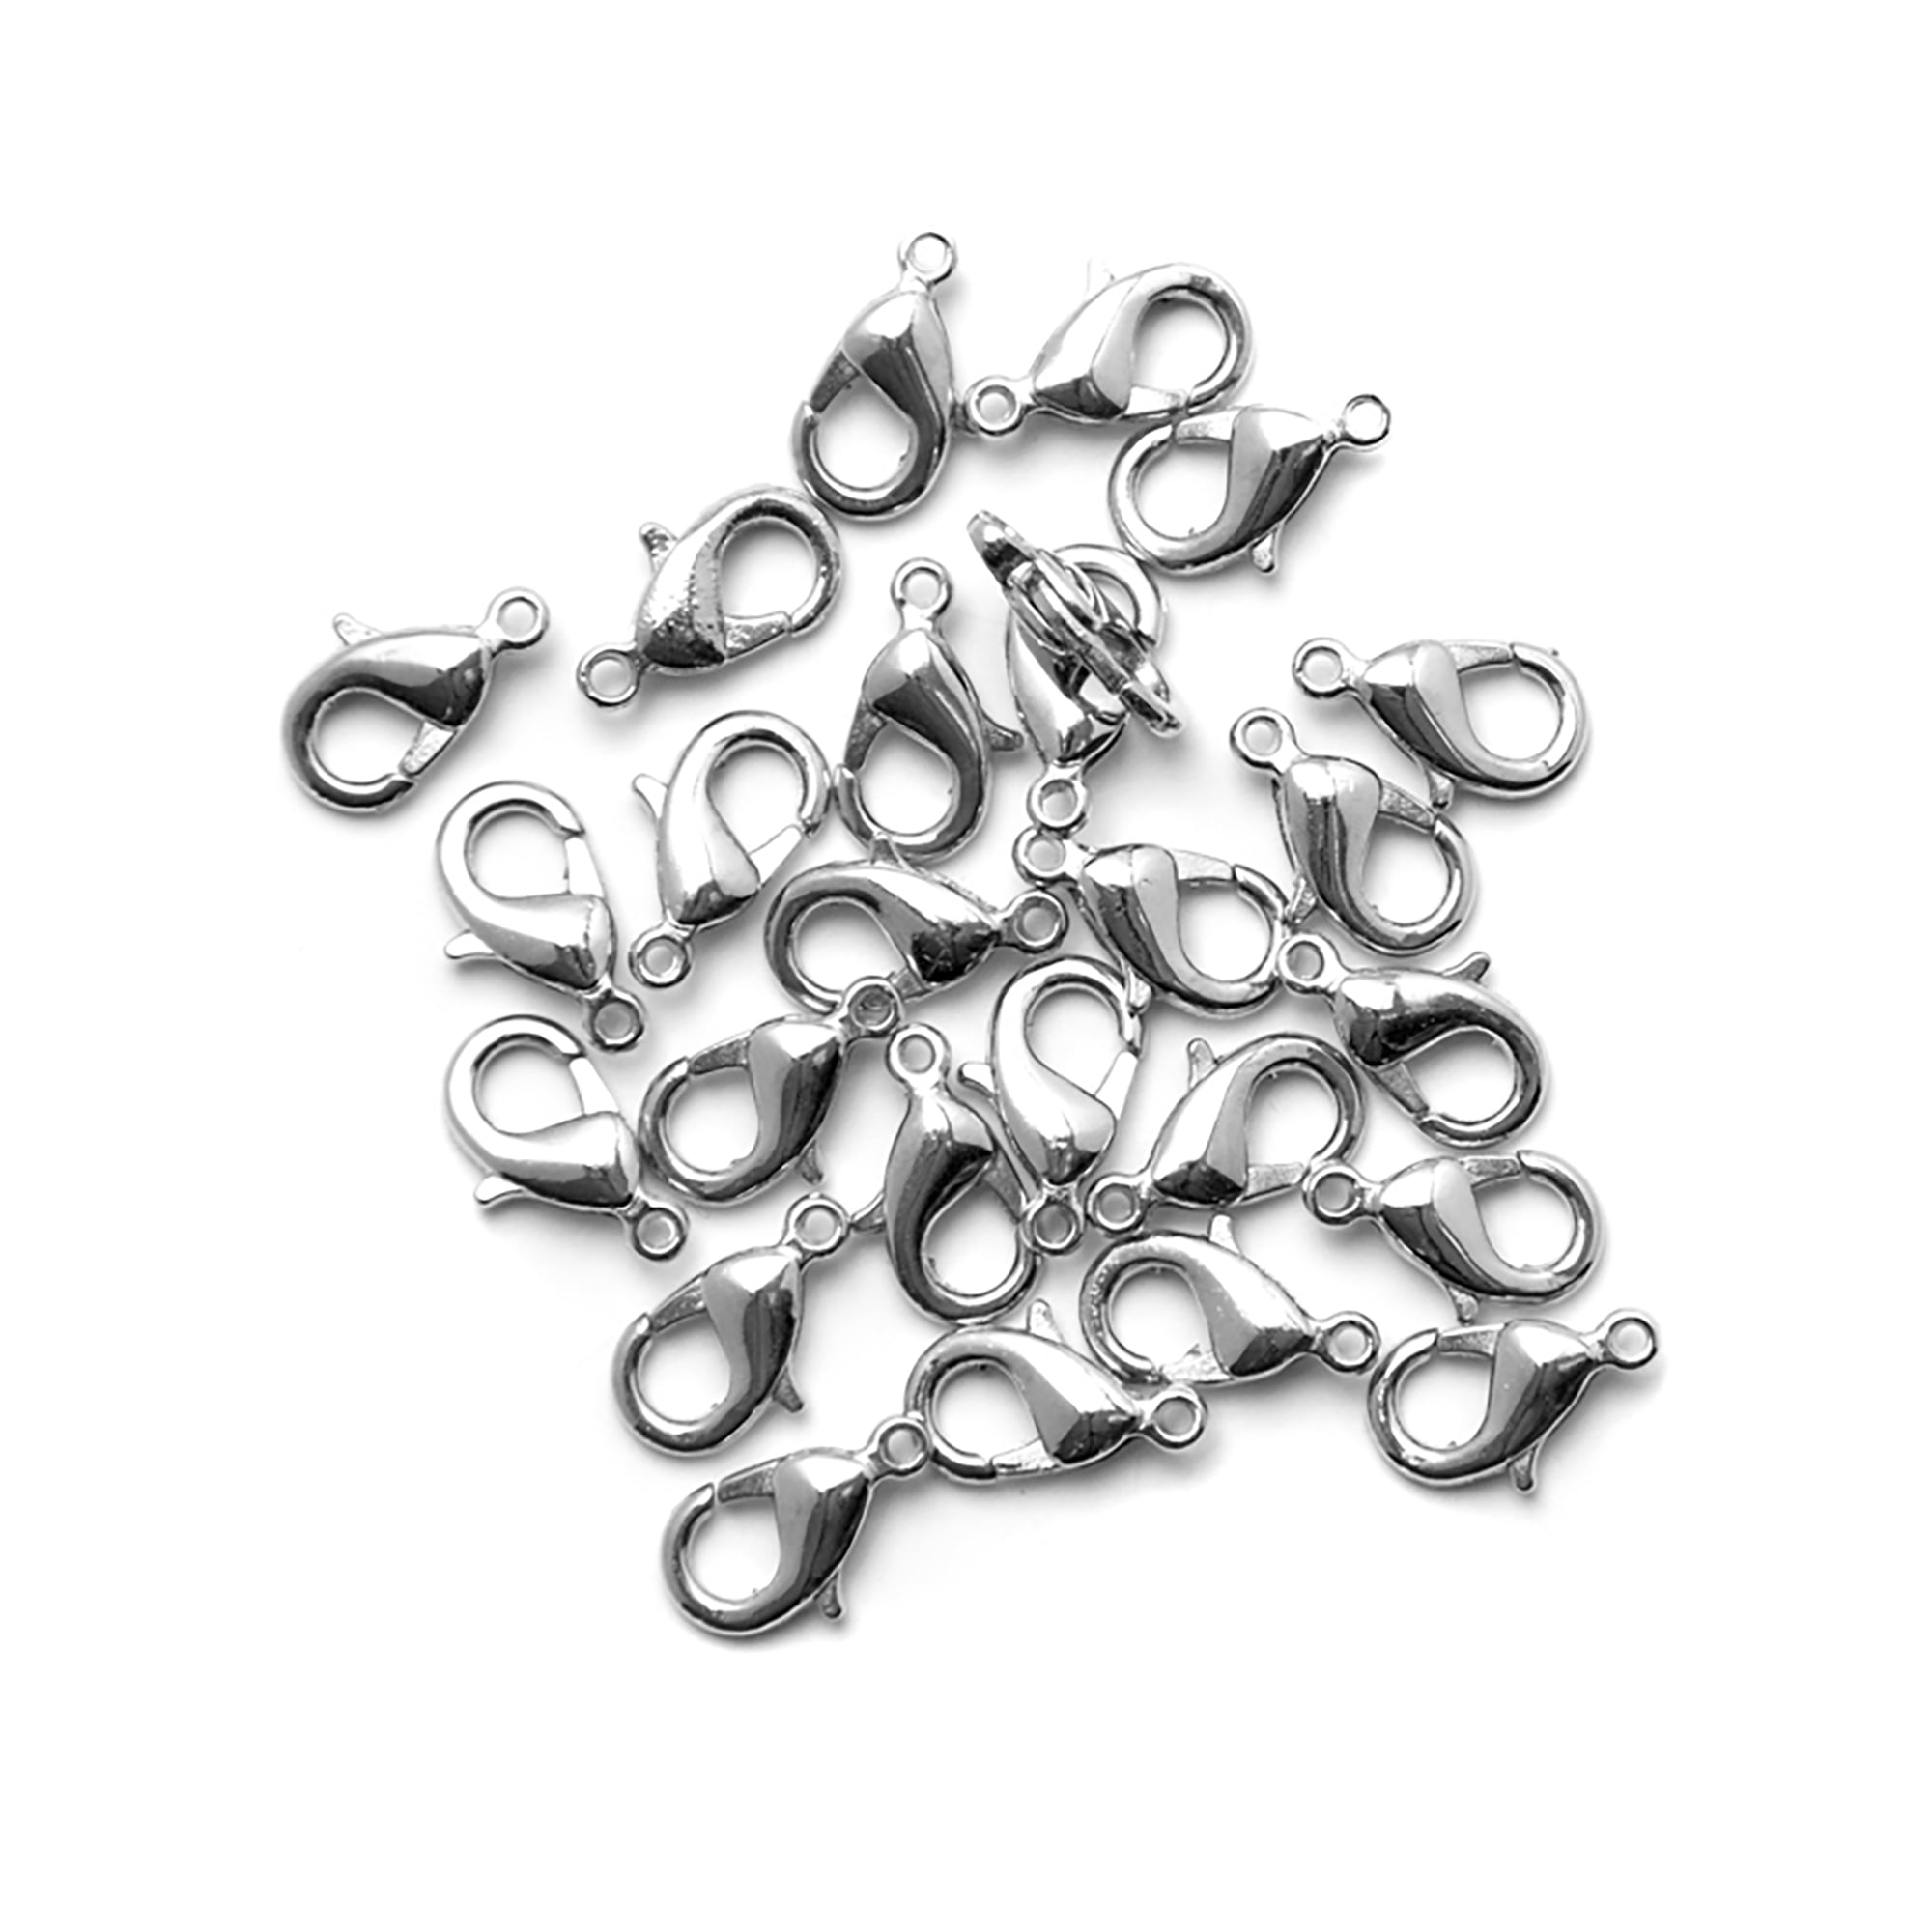 10 Pcs Stainless Steel Lobster Clasps 9 x 5 mm Various Sizes